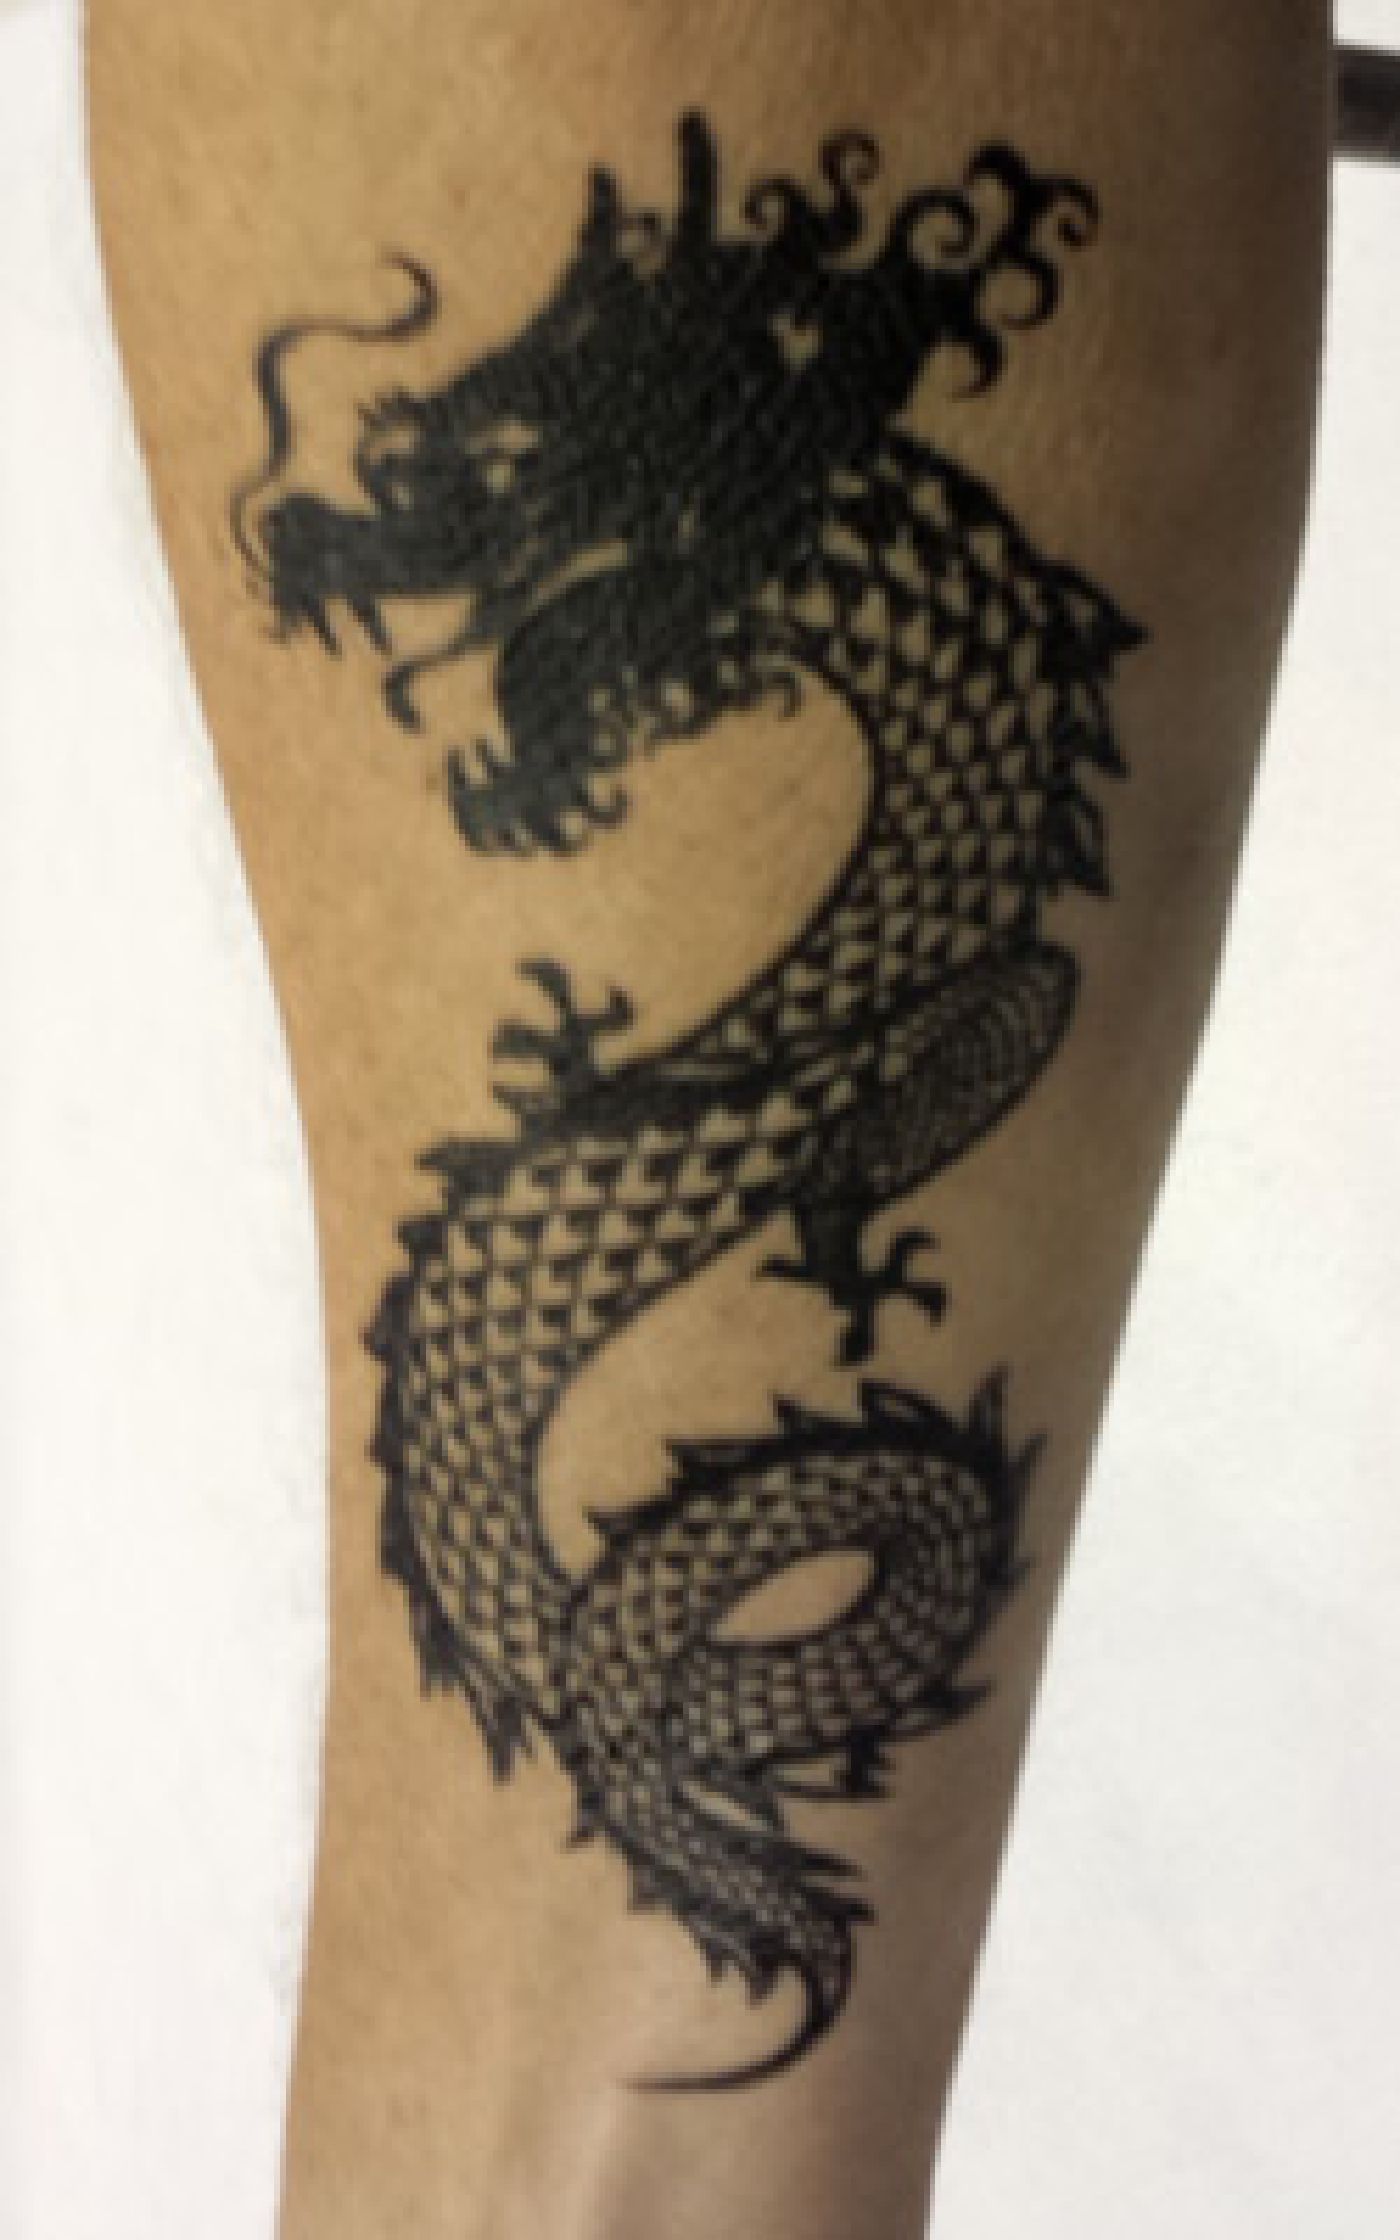 Black matte dragon tattoo, is it real or not? Raleigh NC